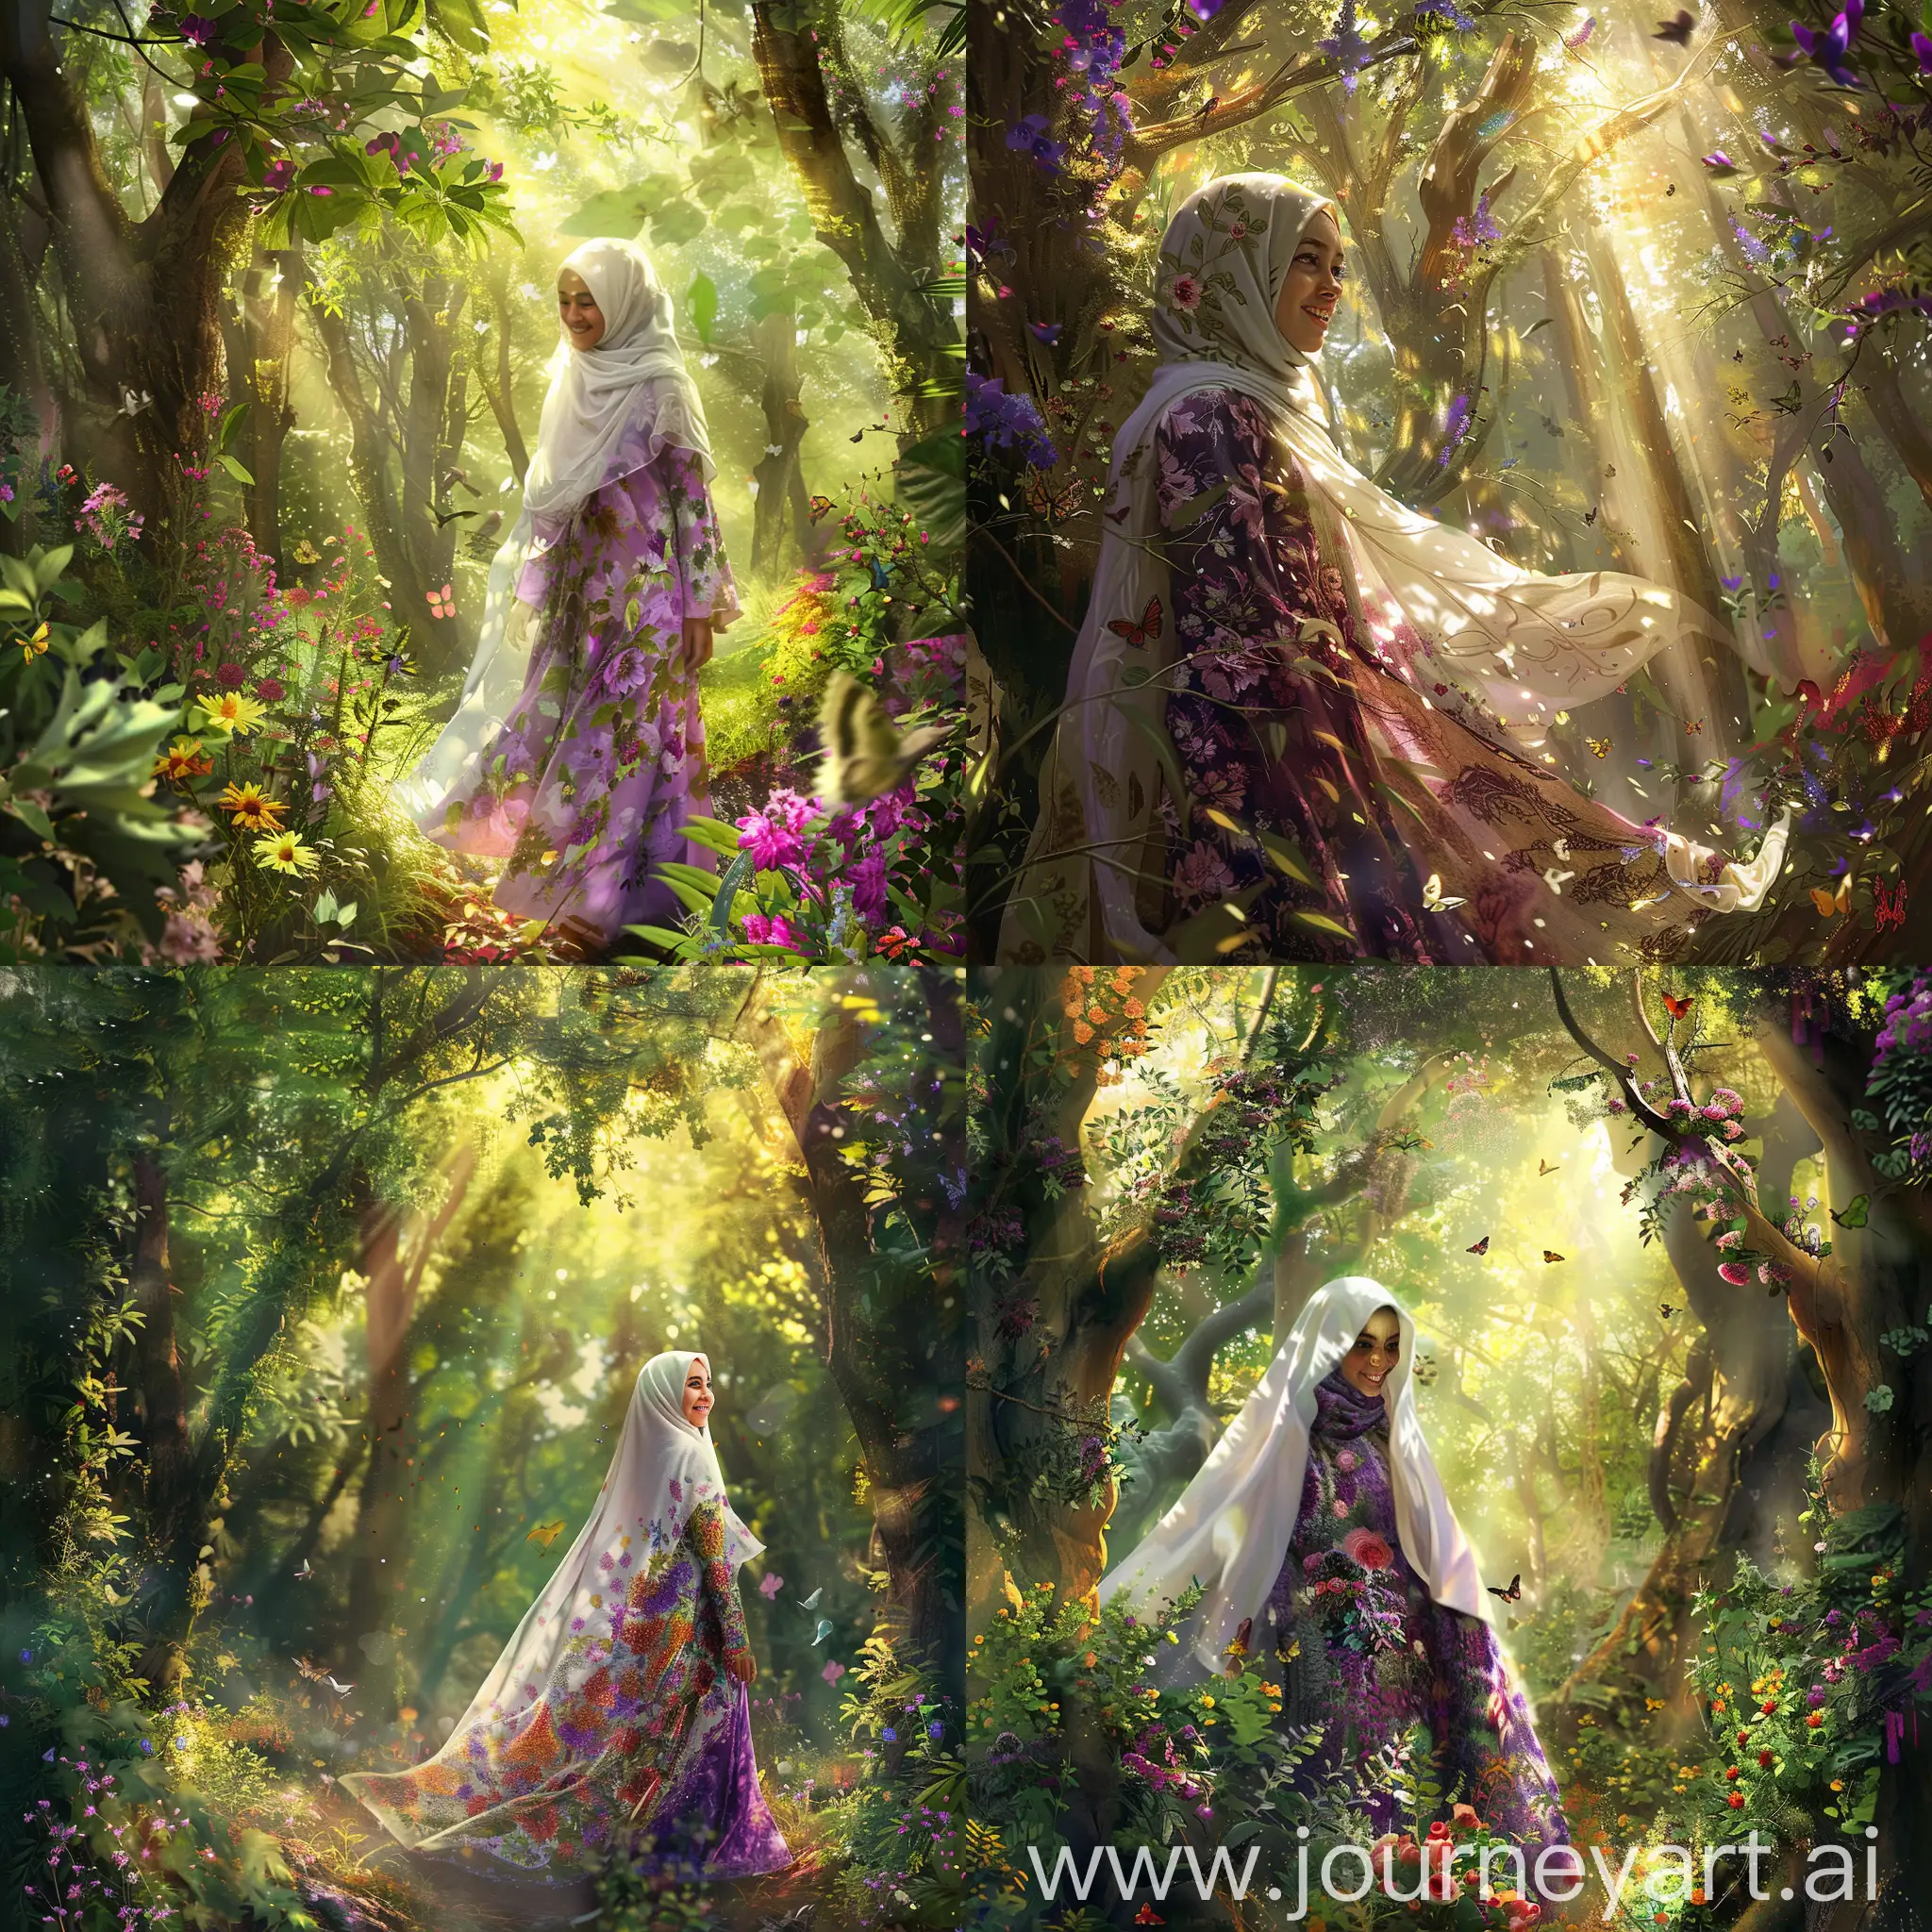 Smiling-Woman-in-White-Hijab-and-Purple-Floral-Dress-in-Enchanting-Forest-Fantasy